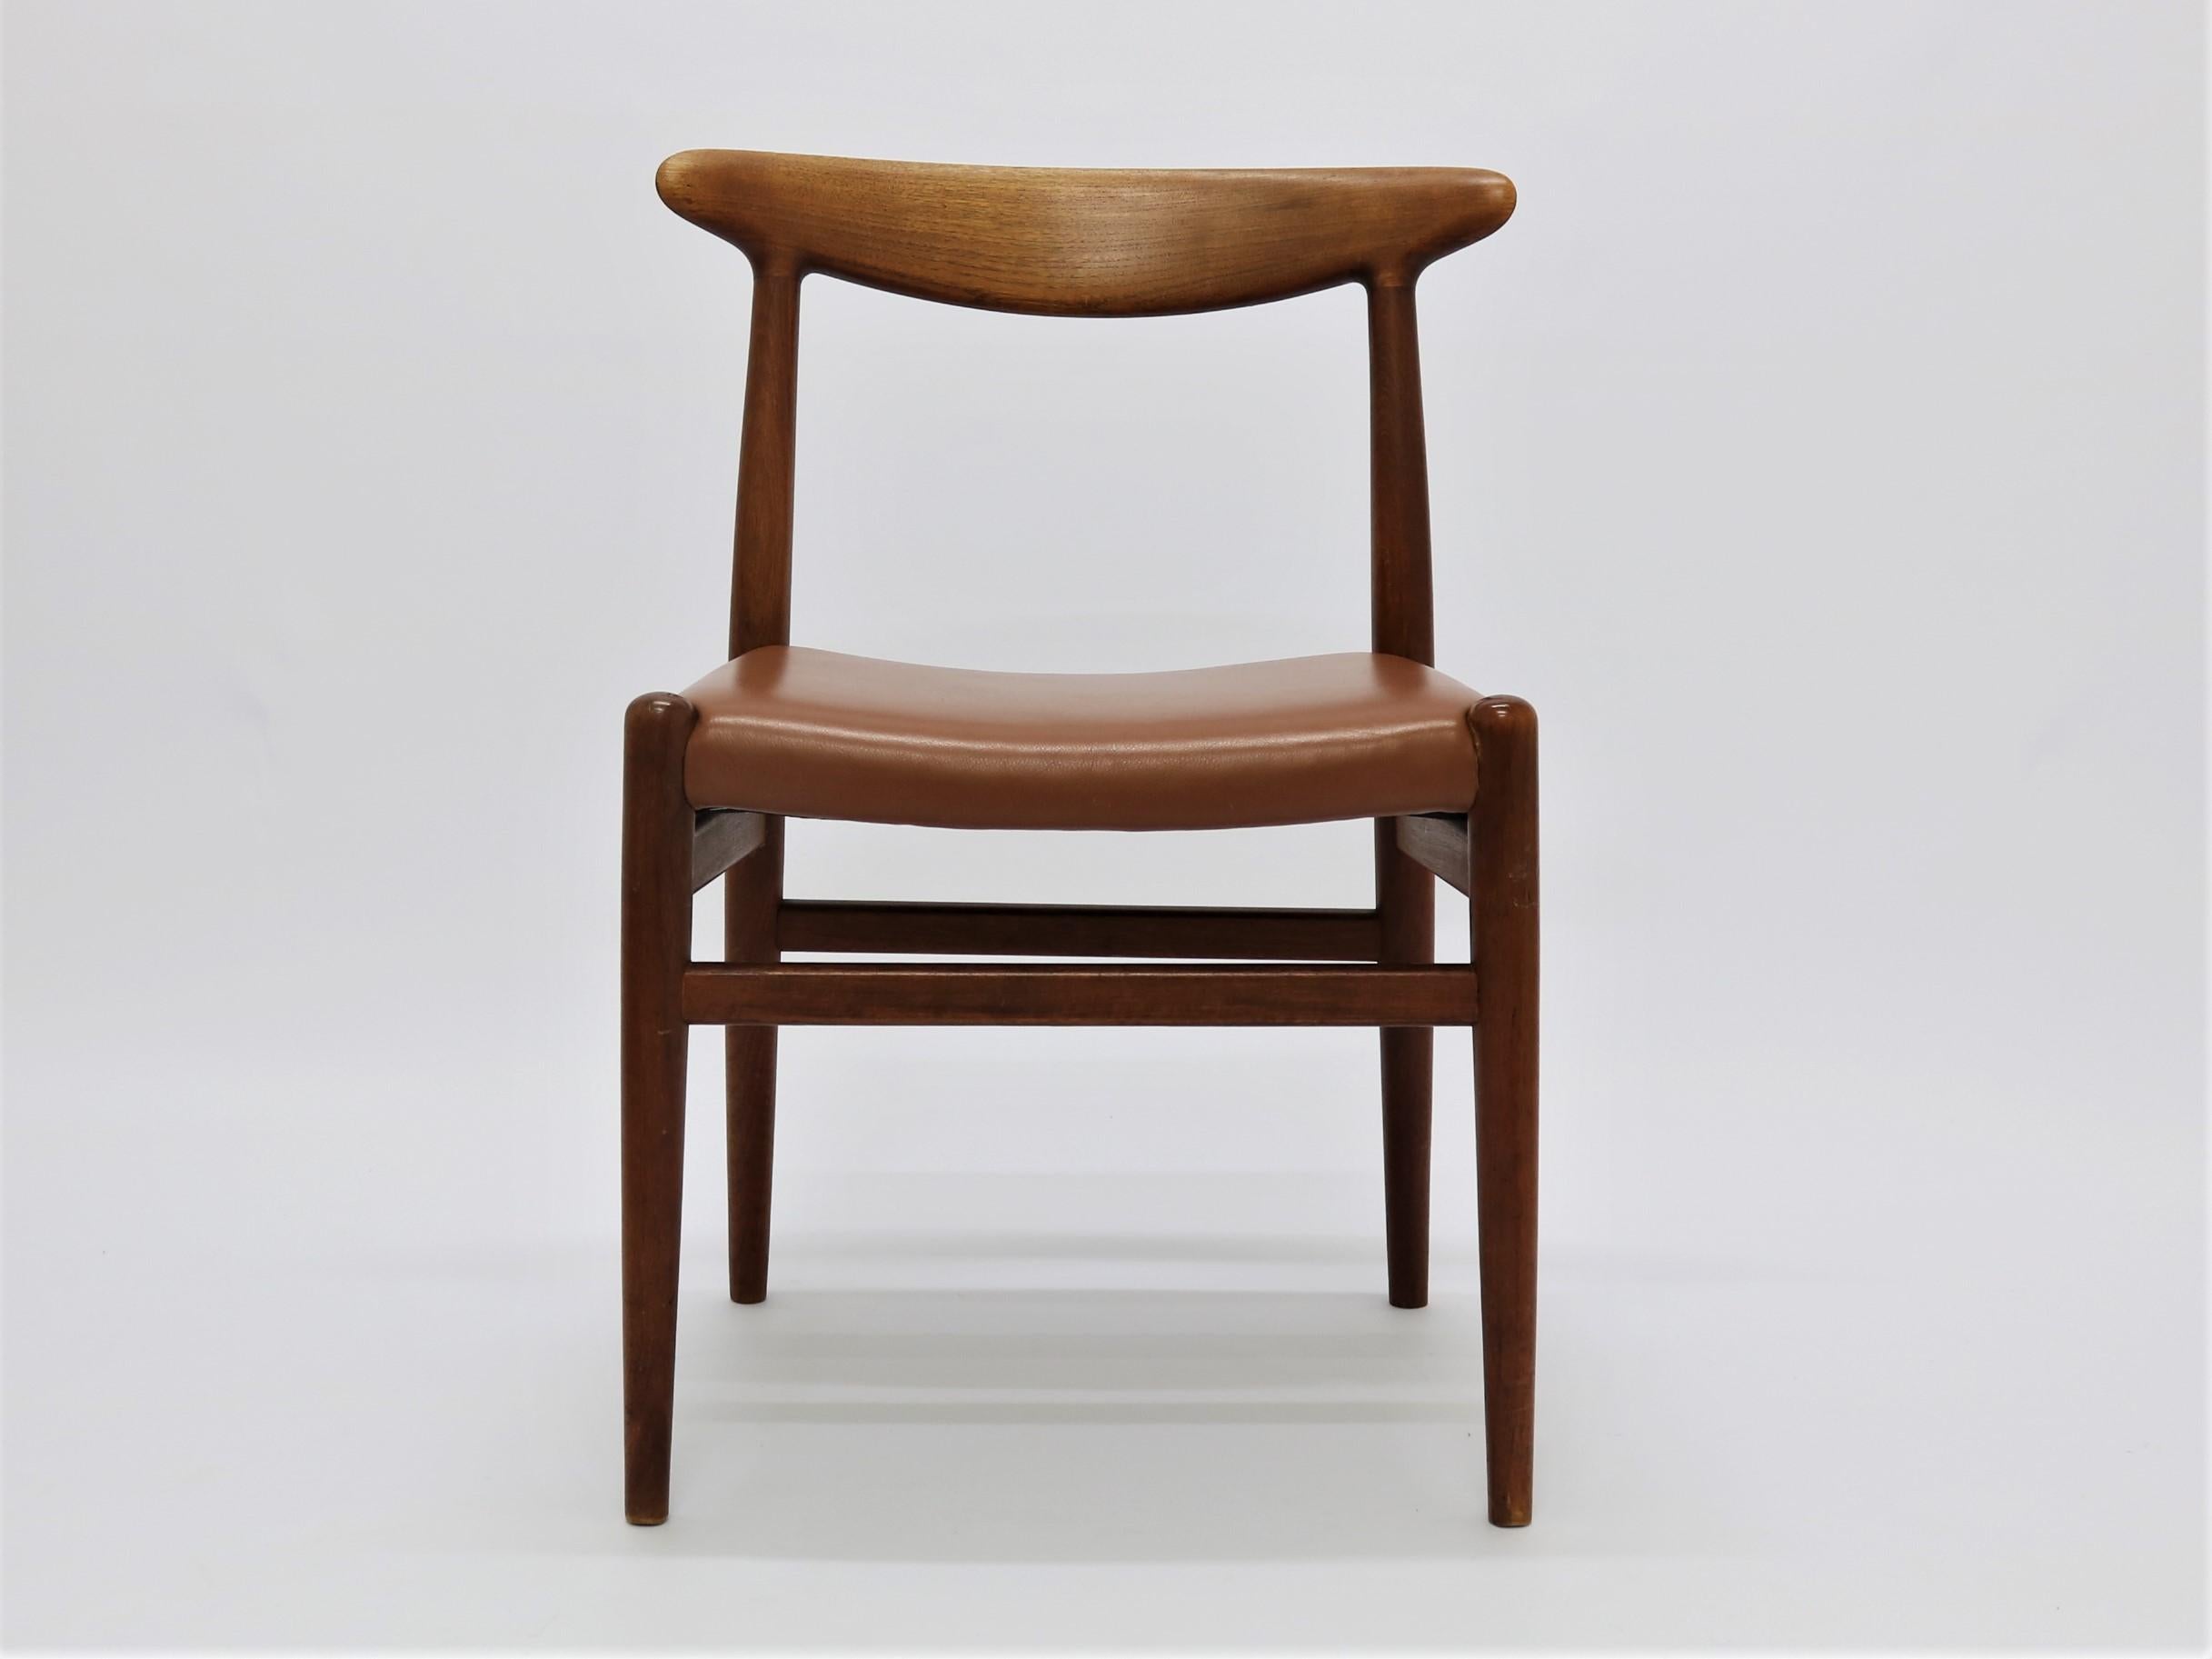 Dining chairs in solid teak wood and cognac leather by Hans J. Wegner. Produced and stamped from C.M. Madsens in Odense, Denmark in the 1950s. All 12 chairs have only had one owner and has always been a set.